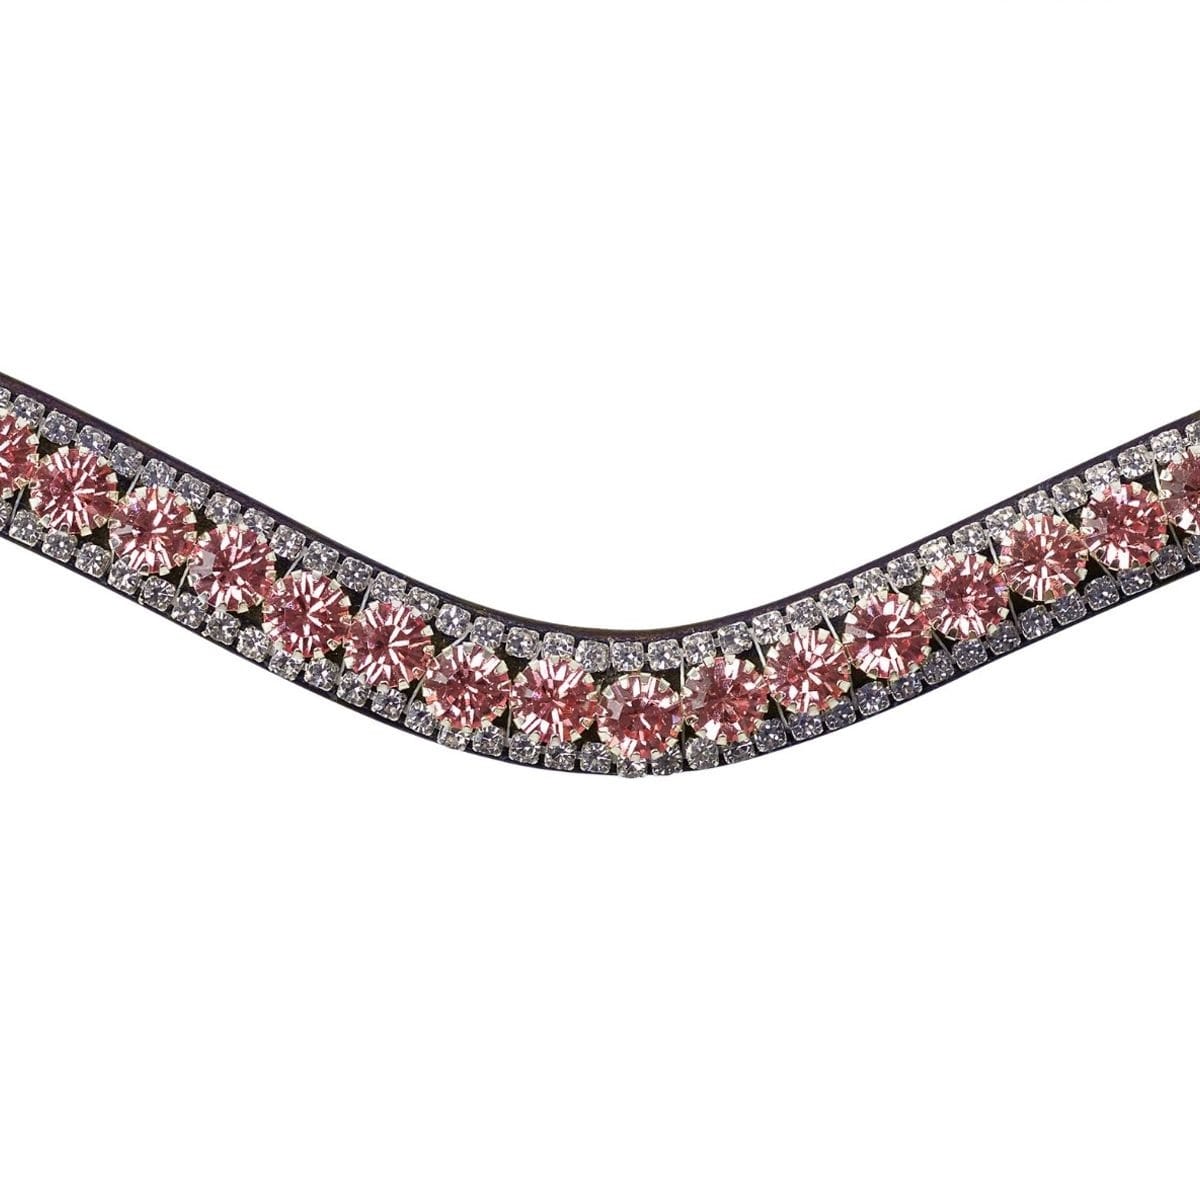 PS of Sweden Pale Pink Browband